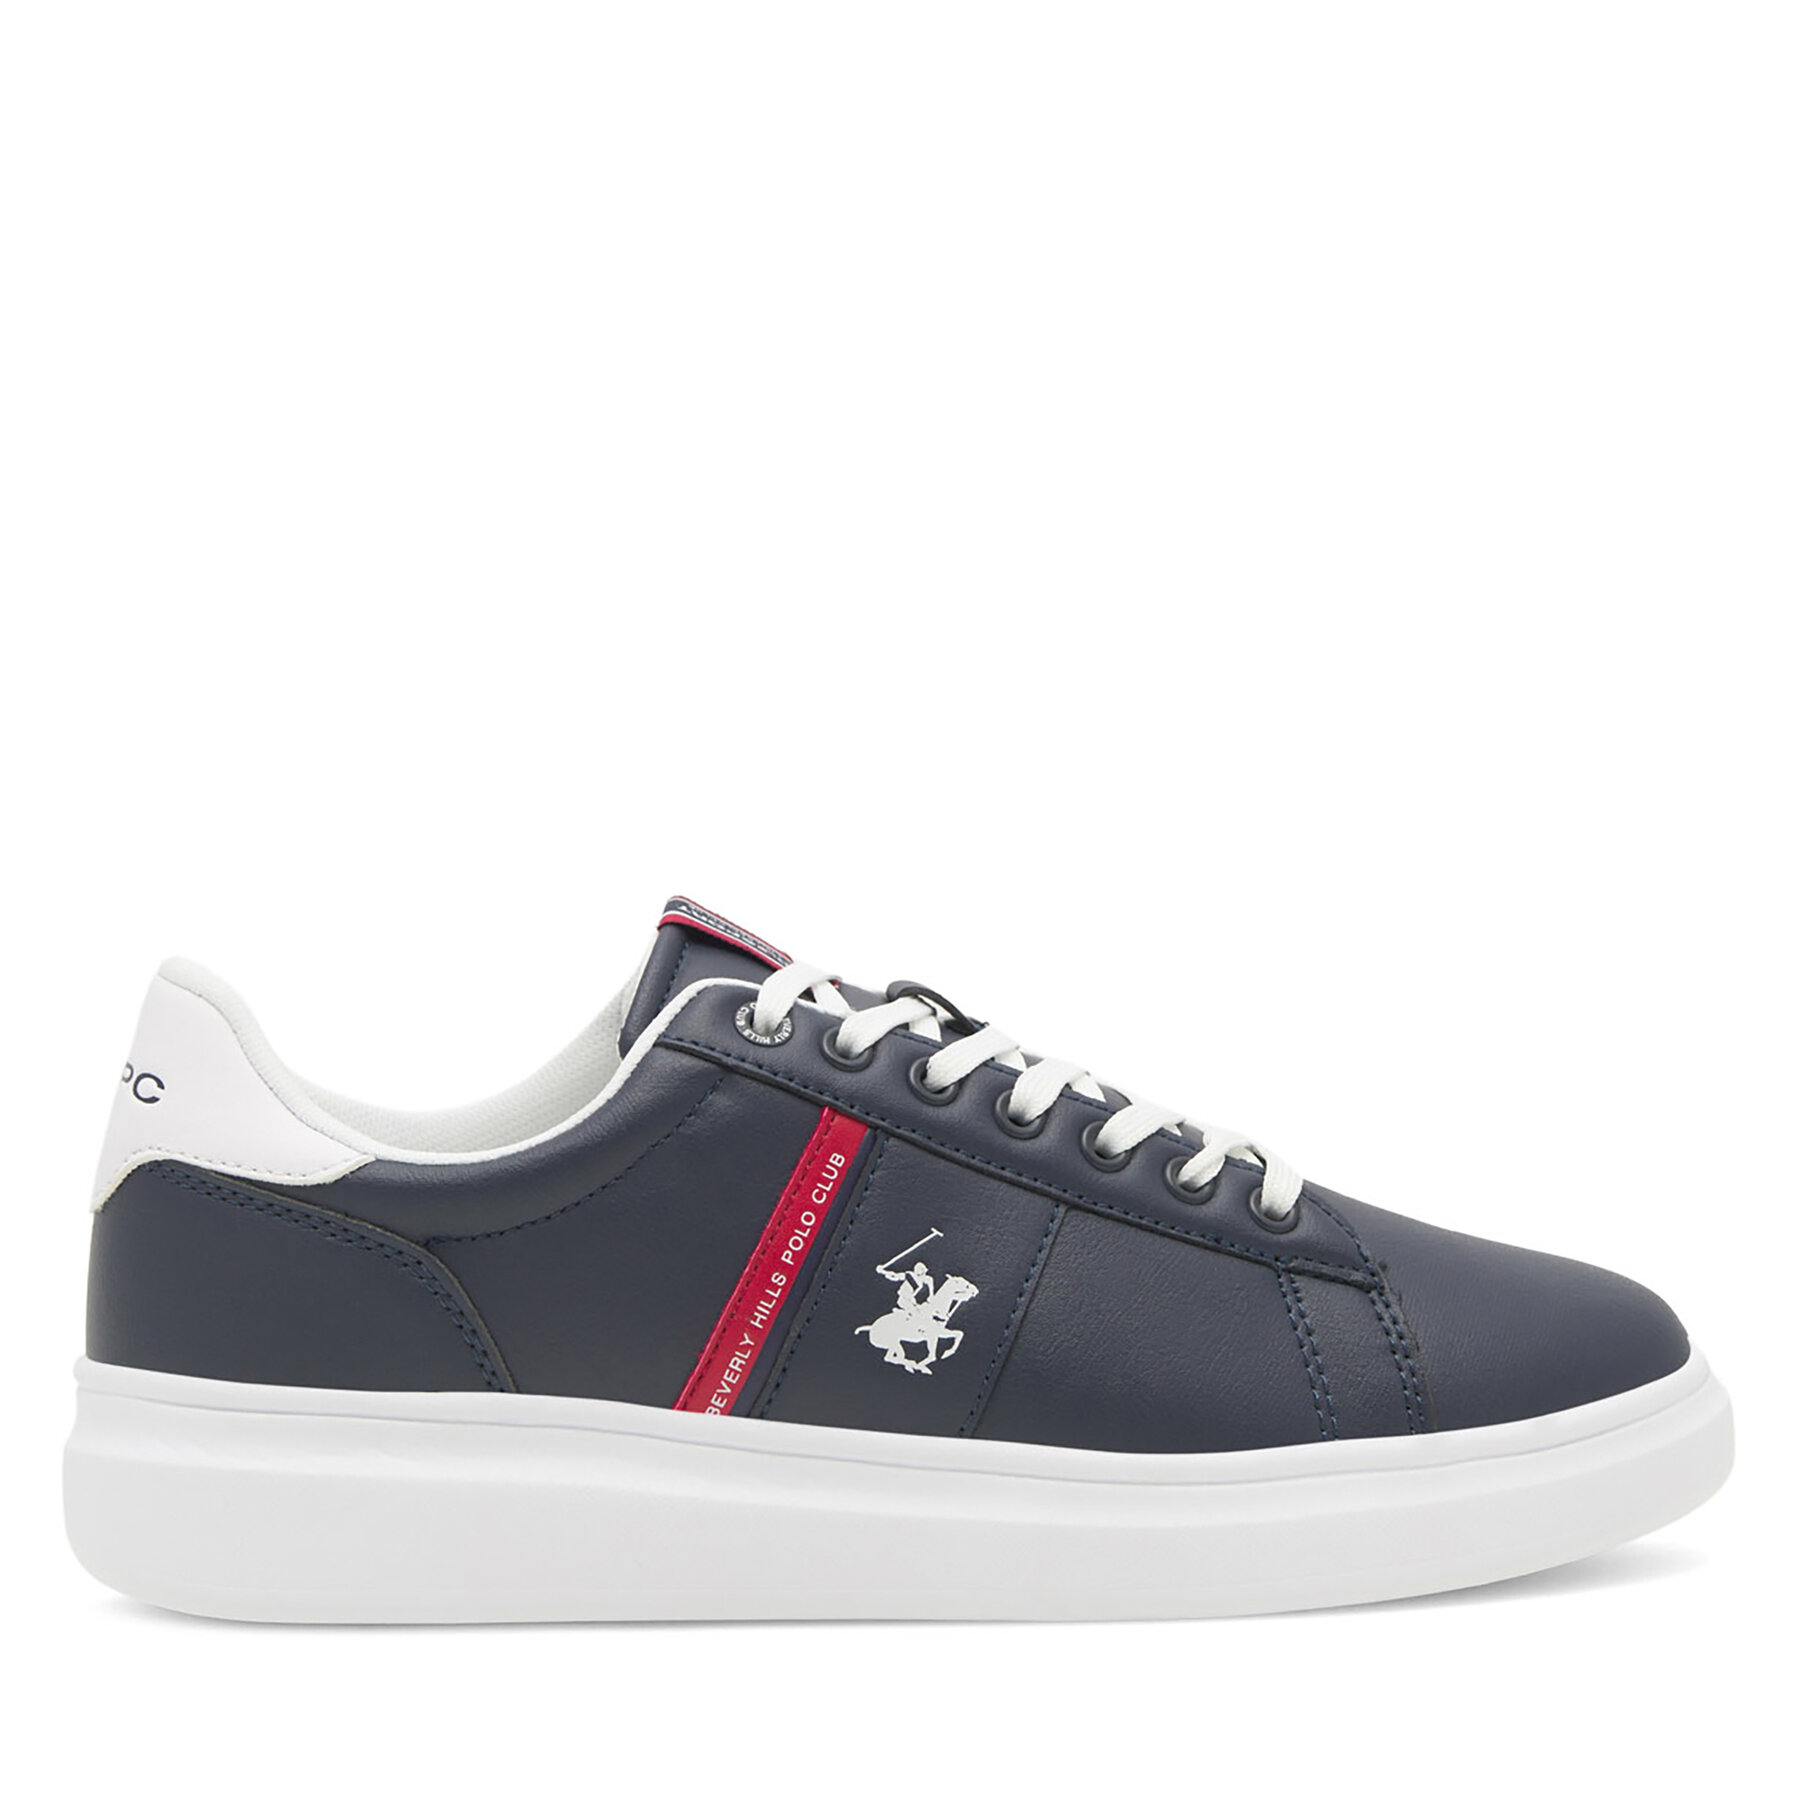 Sneakers Beverly Hills Polo Club M-23MC1008 Dunkelblau von Beverly Hills Polo Club